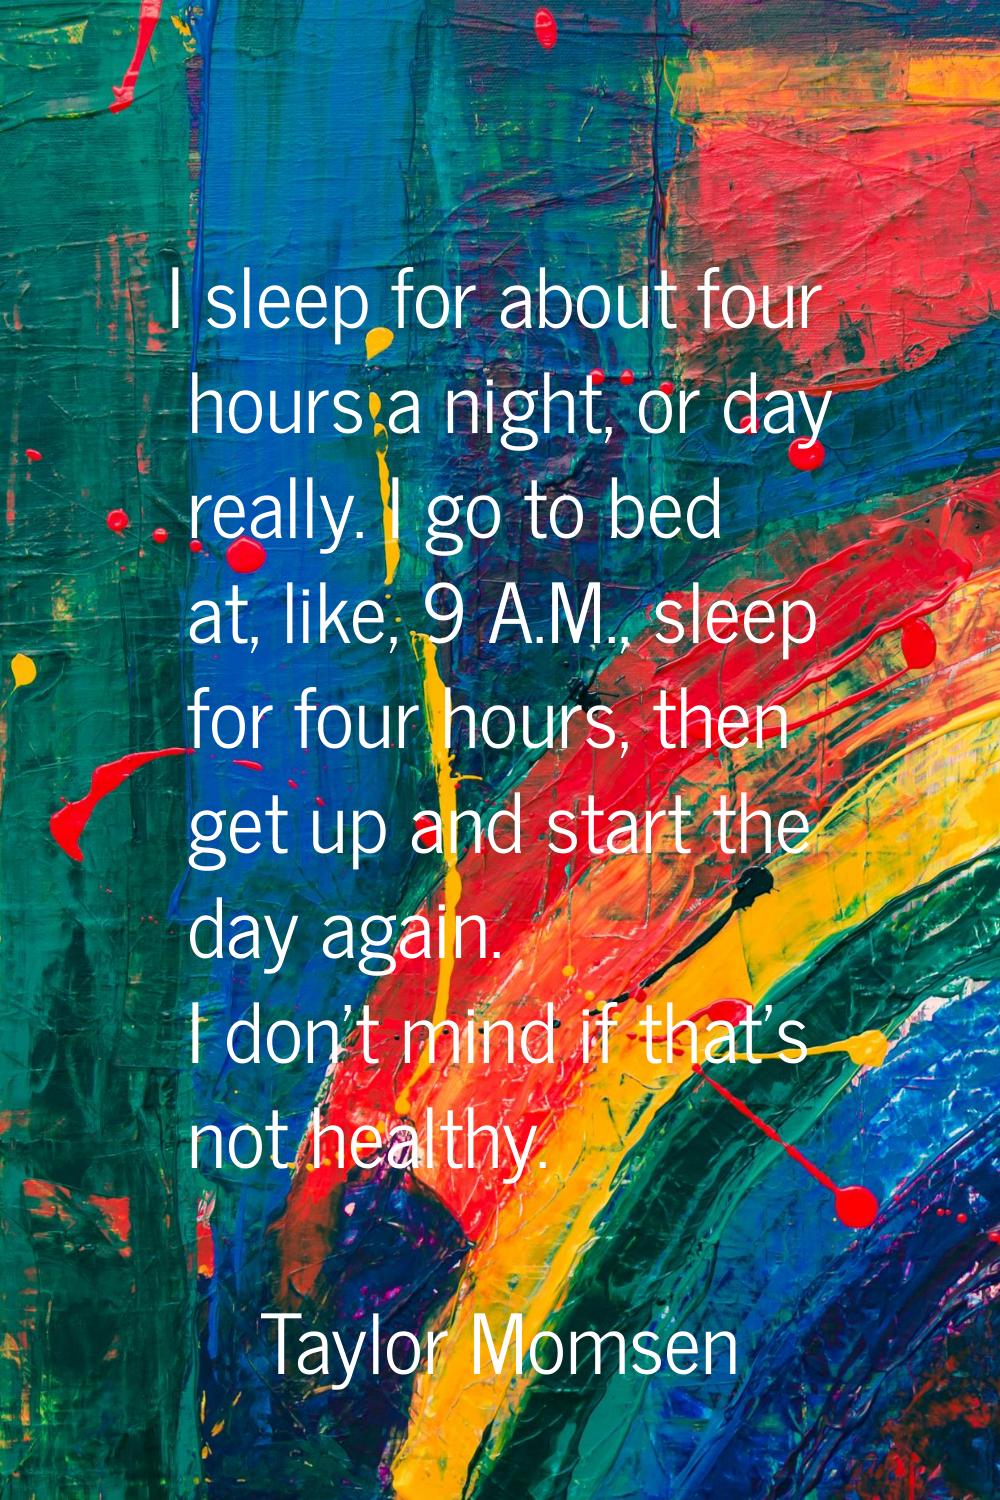 I sleep for about four hours a night, or day really. I go to bed at, like, 9 A.M., sleep for four h